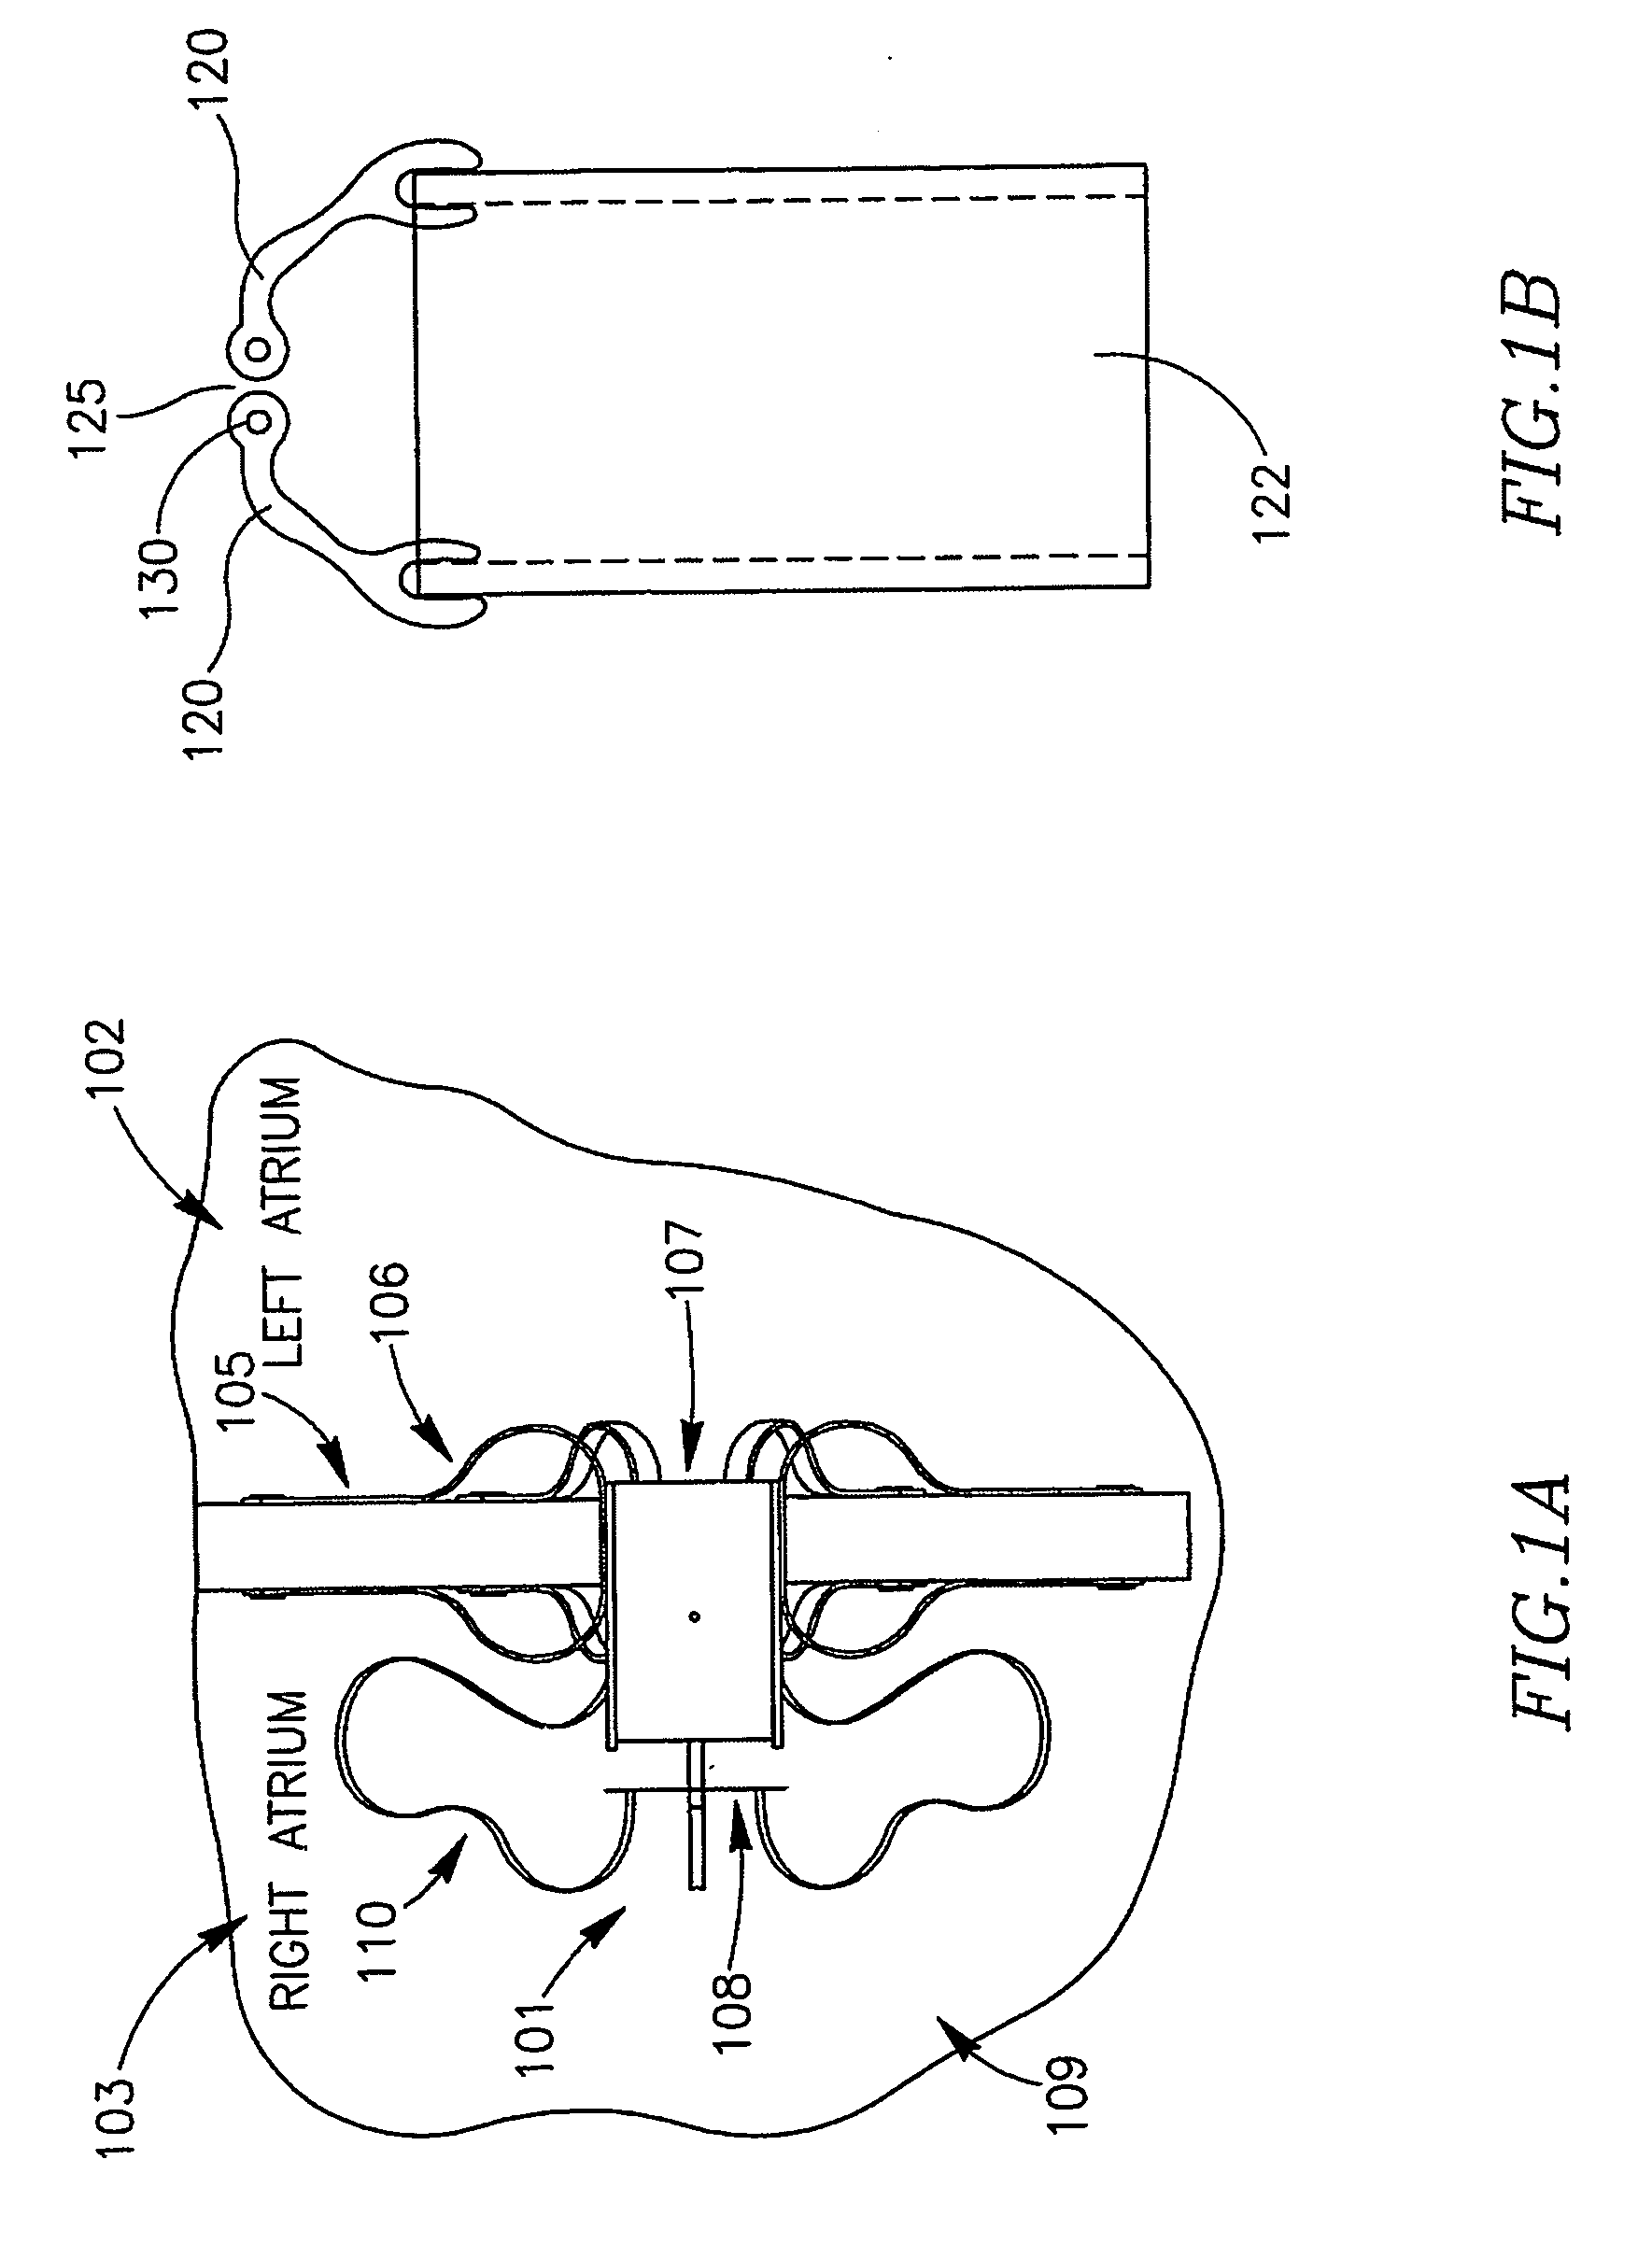 Device and method for controlling in-vivo pressure